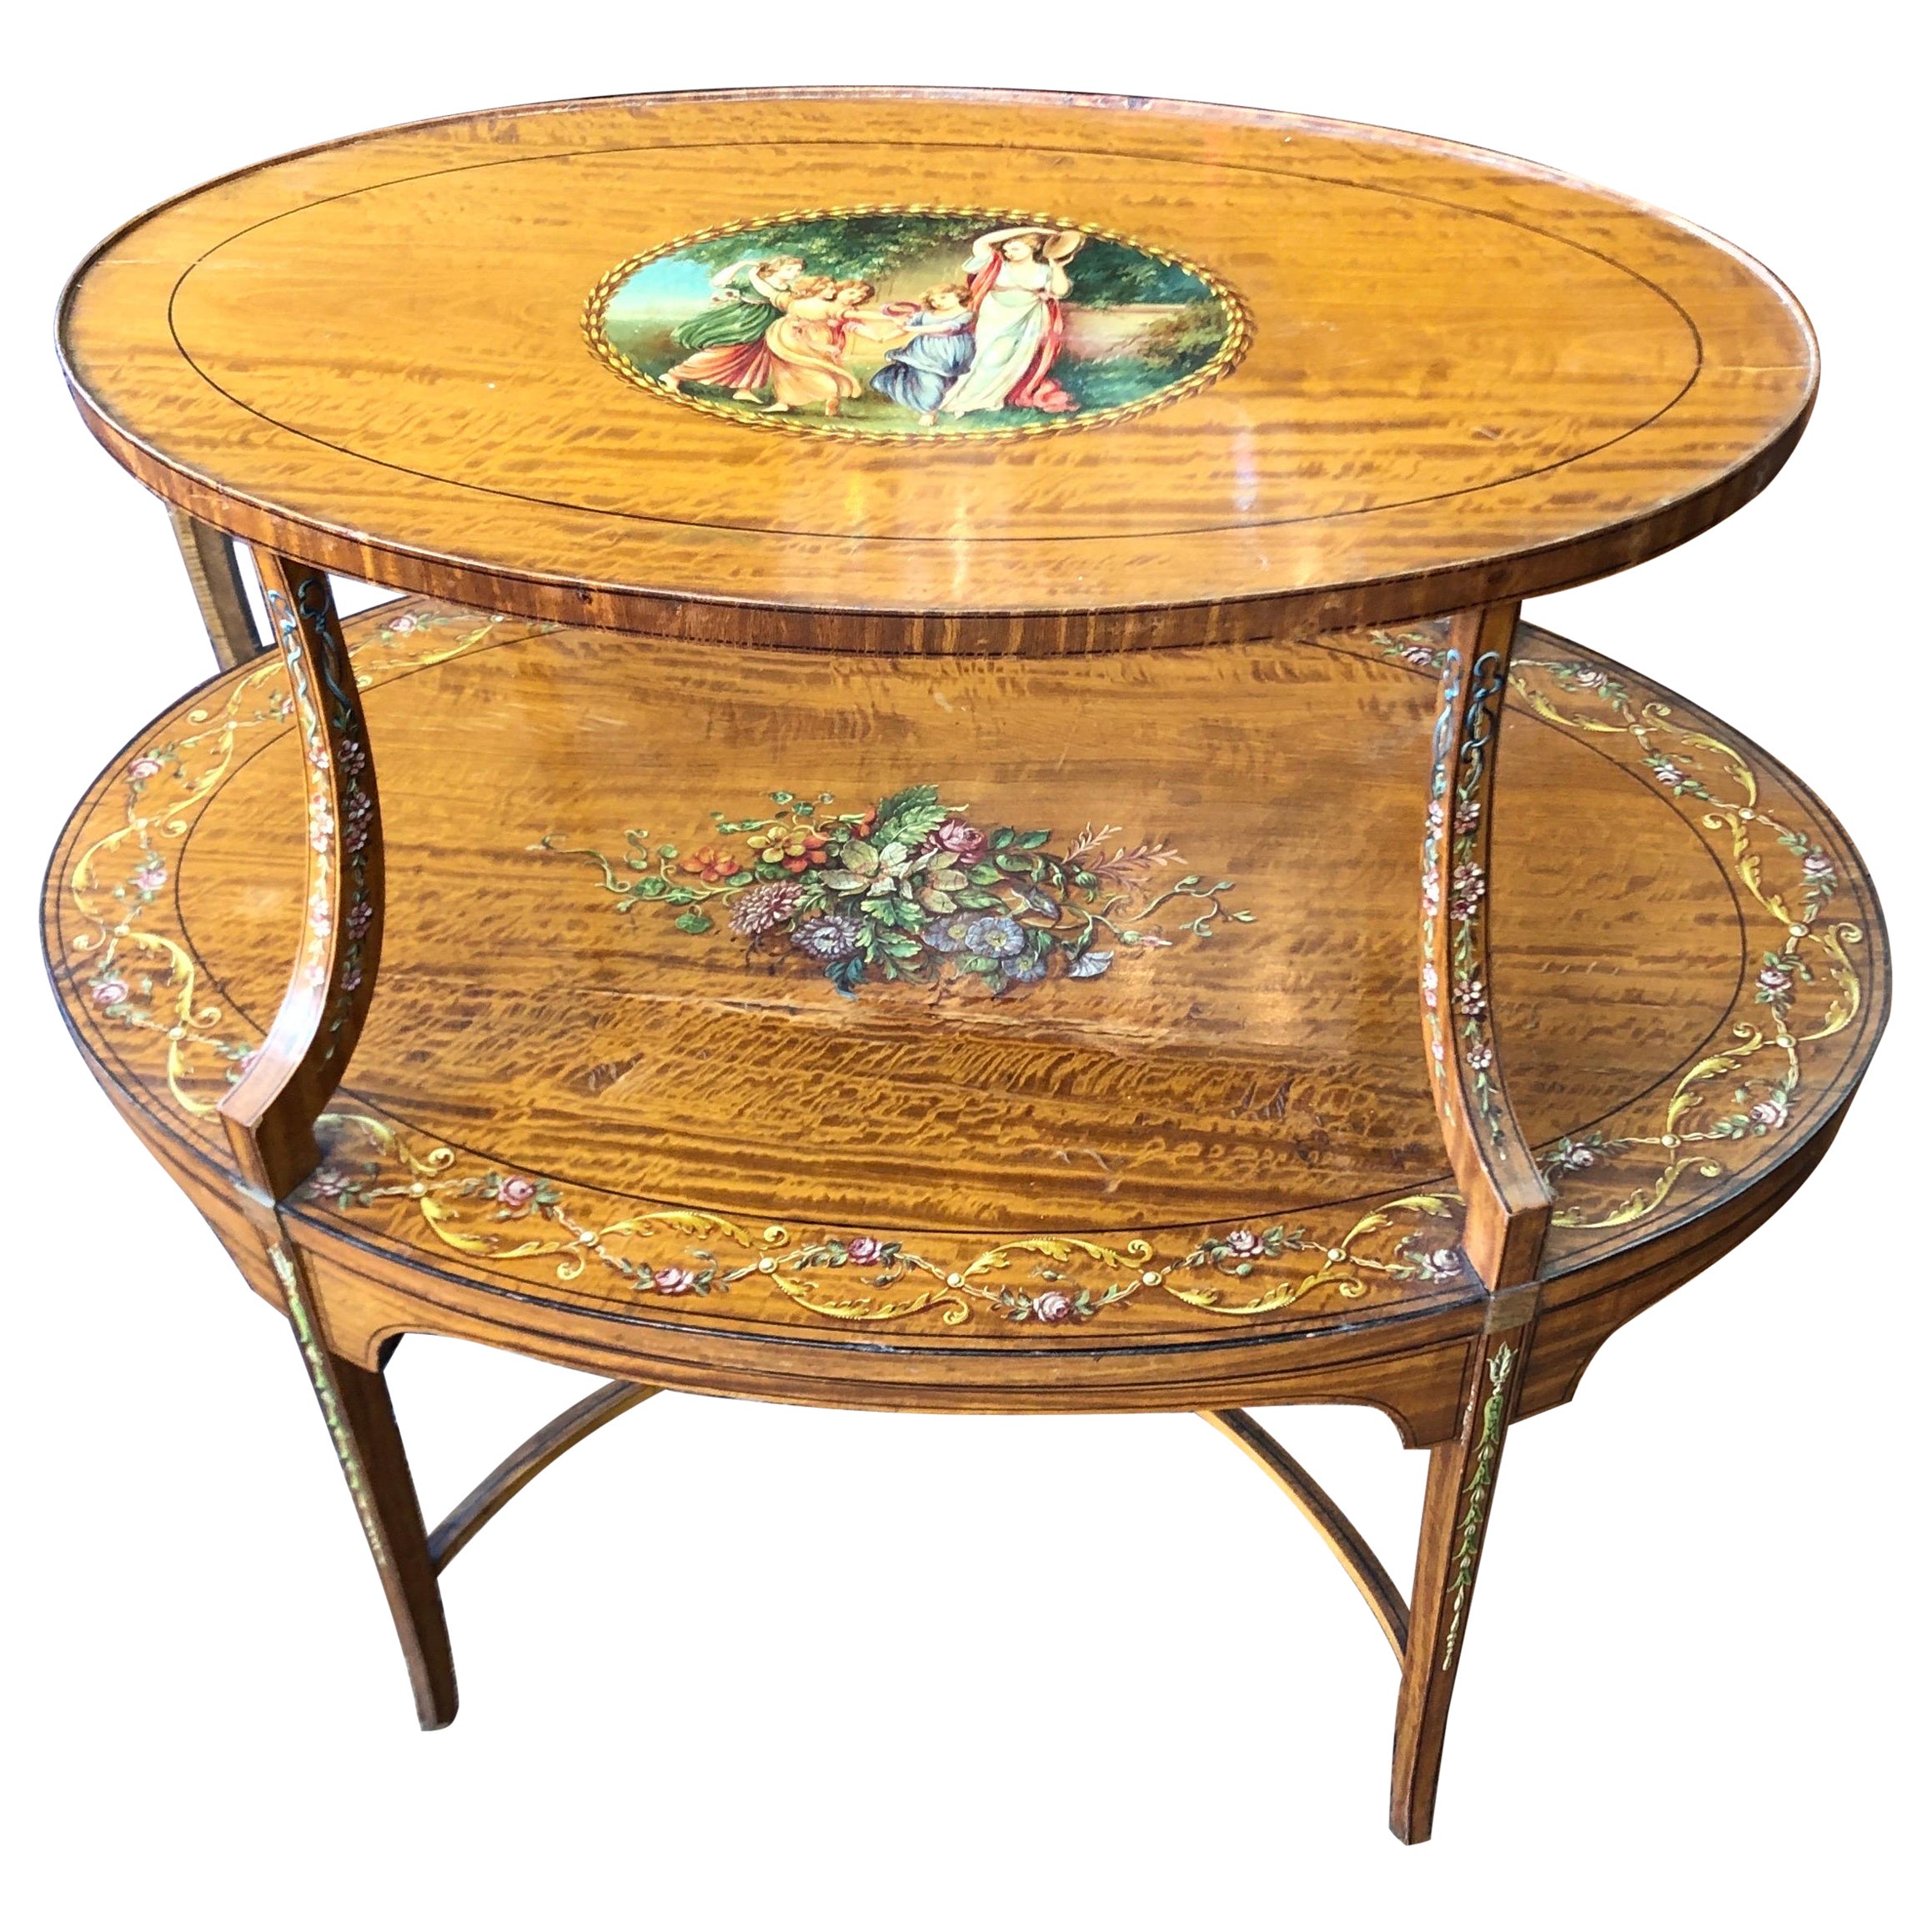 Fabulous Antique English Edwardian Adam Hand Painted Satinwood 2-Tier Oval Table For Sale